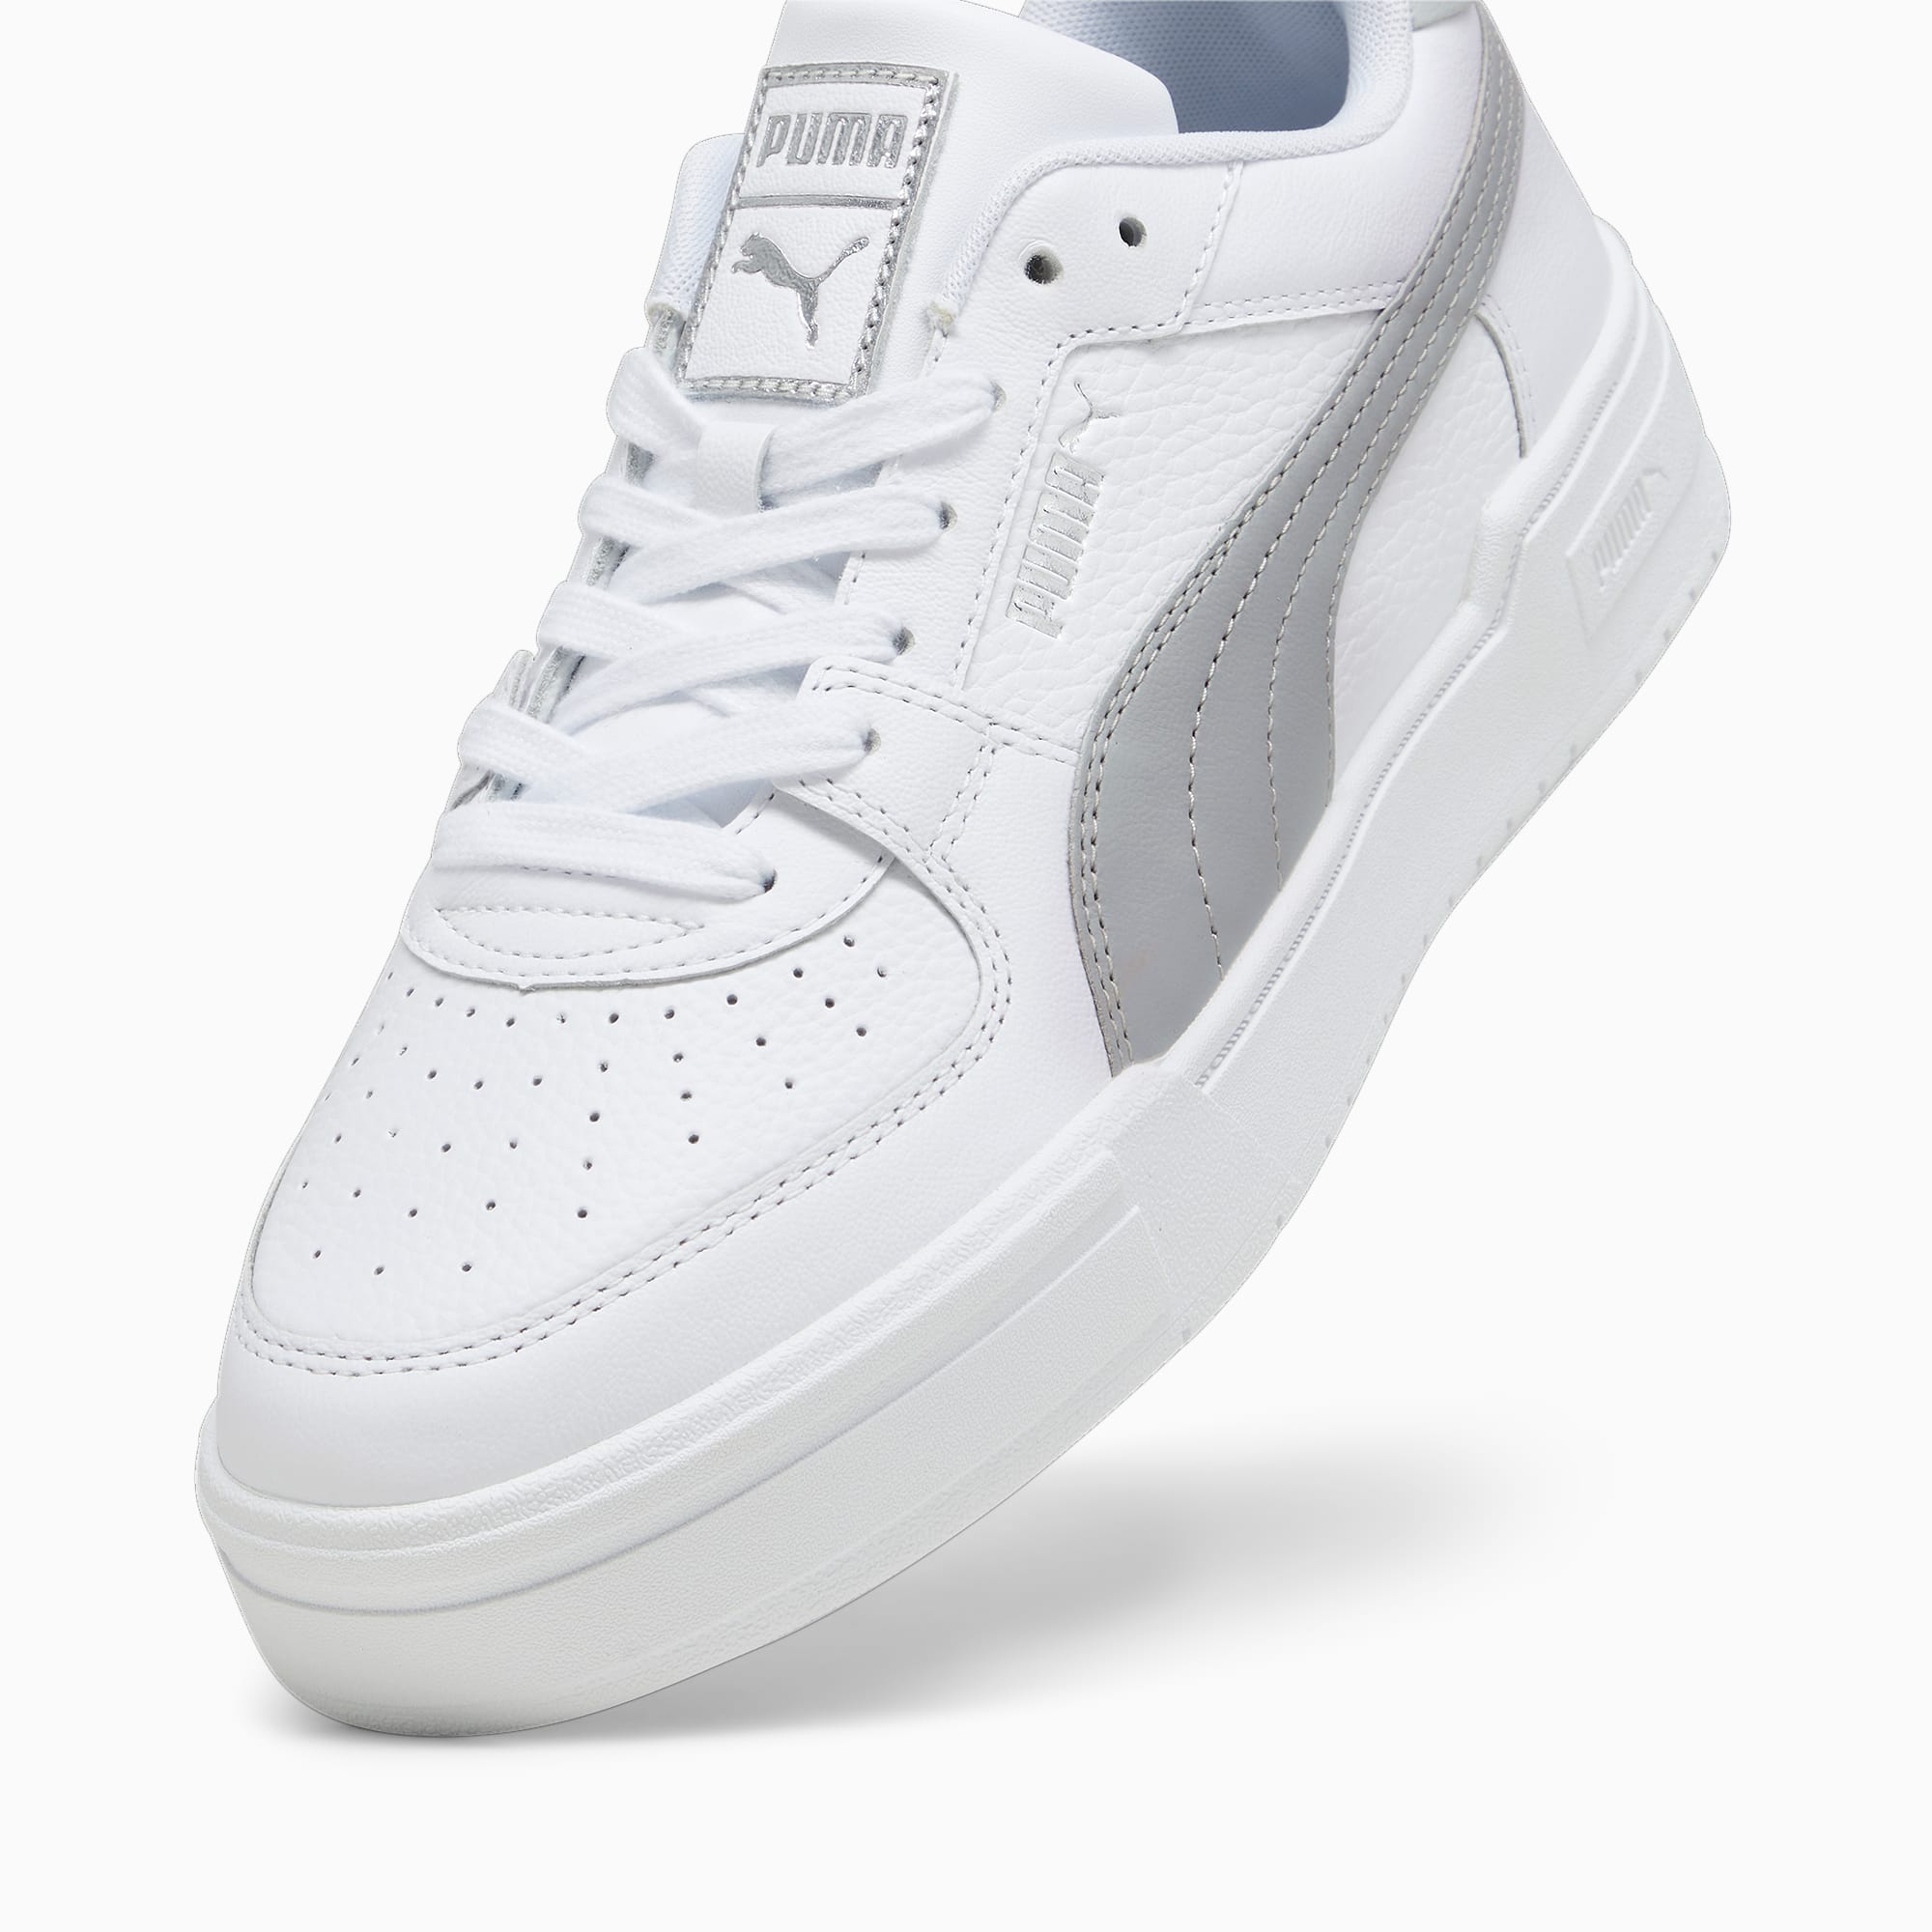 Women's PUMA Ca Pro Classic Trainers, White/Cool Light Grey, Size 48,5, Shoes